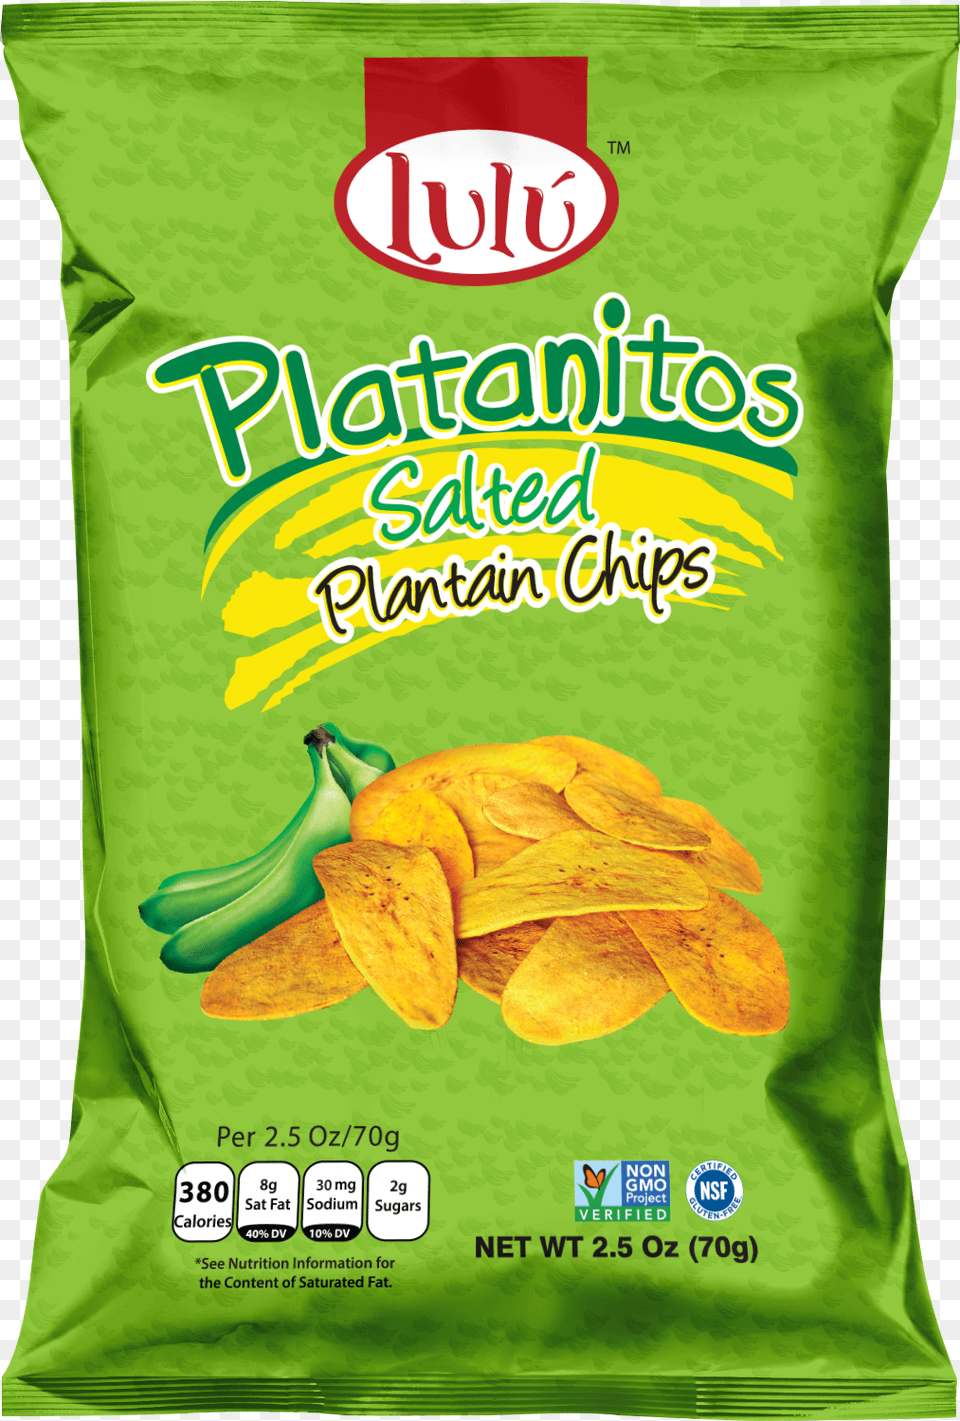 Plantainchips Lulu Plantain Chips Salted, Food, Snack, Bread, Produce Png Image